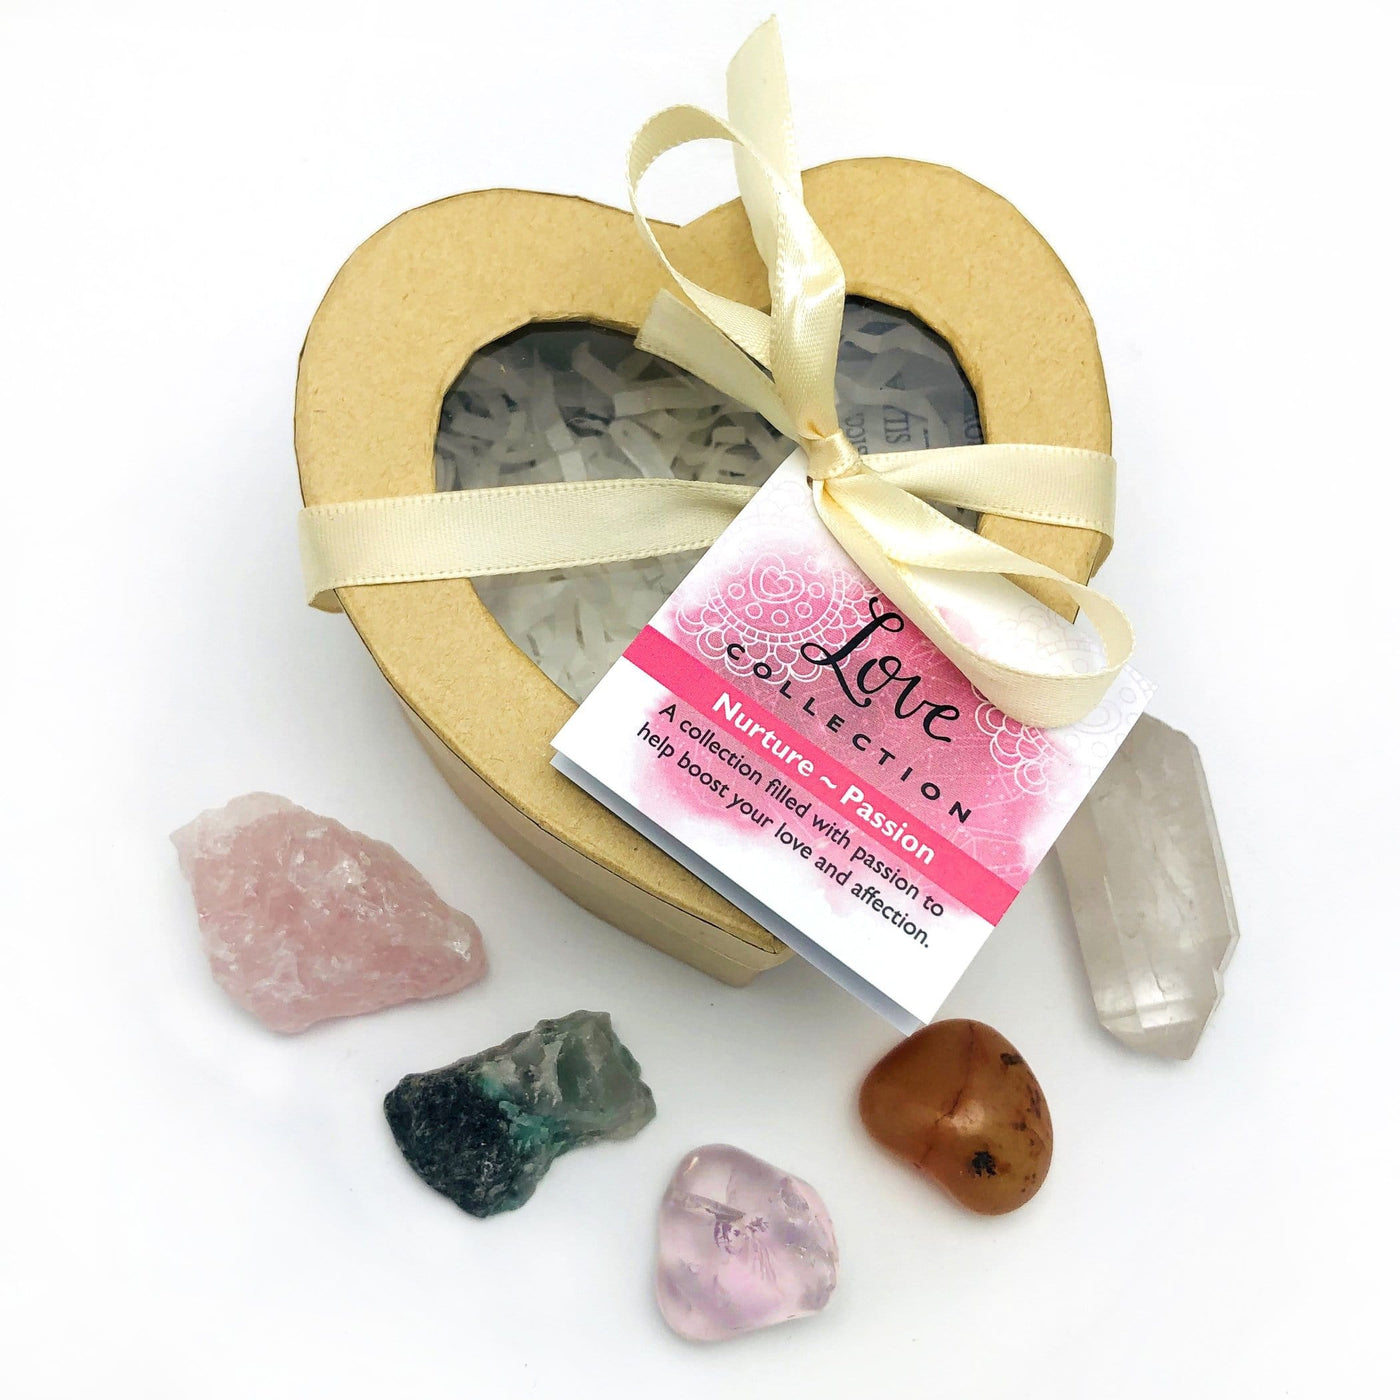 Crystal Healing Love Set of Stones in Heart Shaped Box 